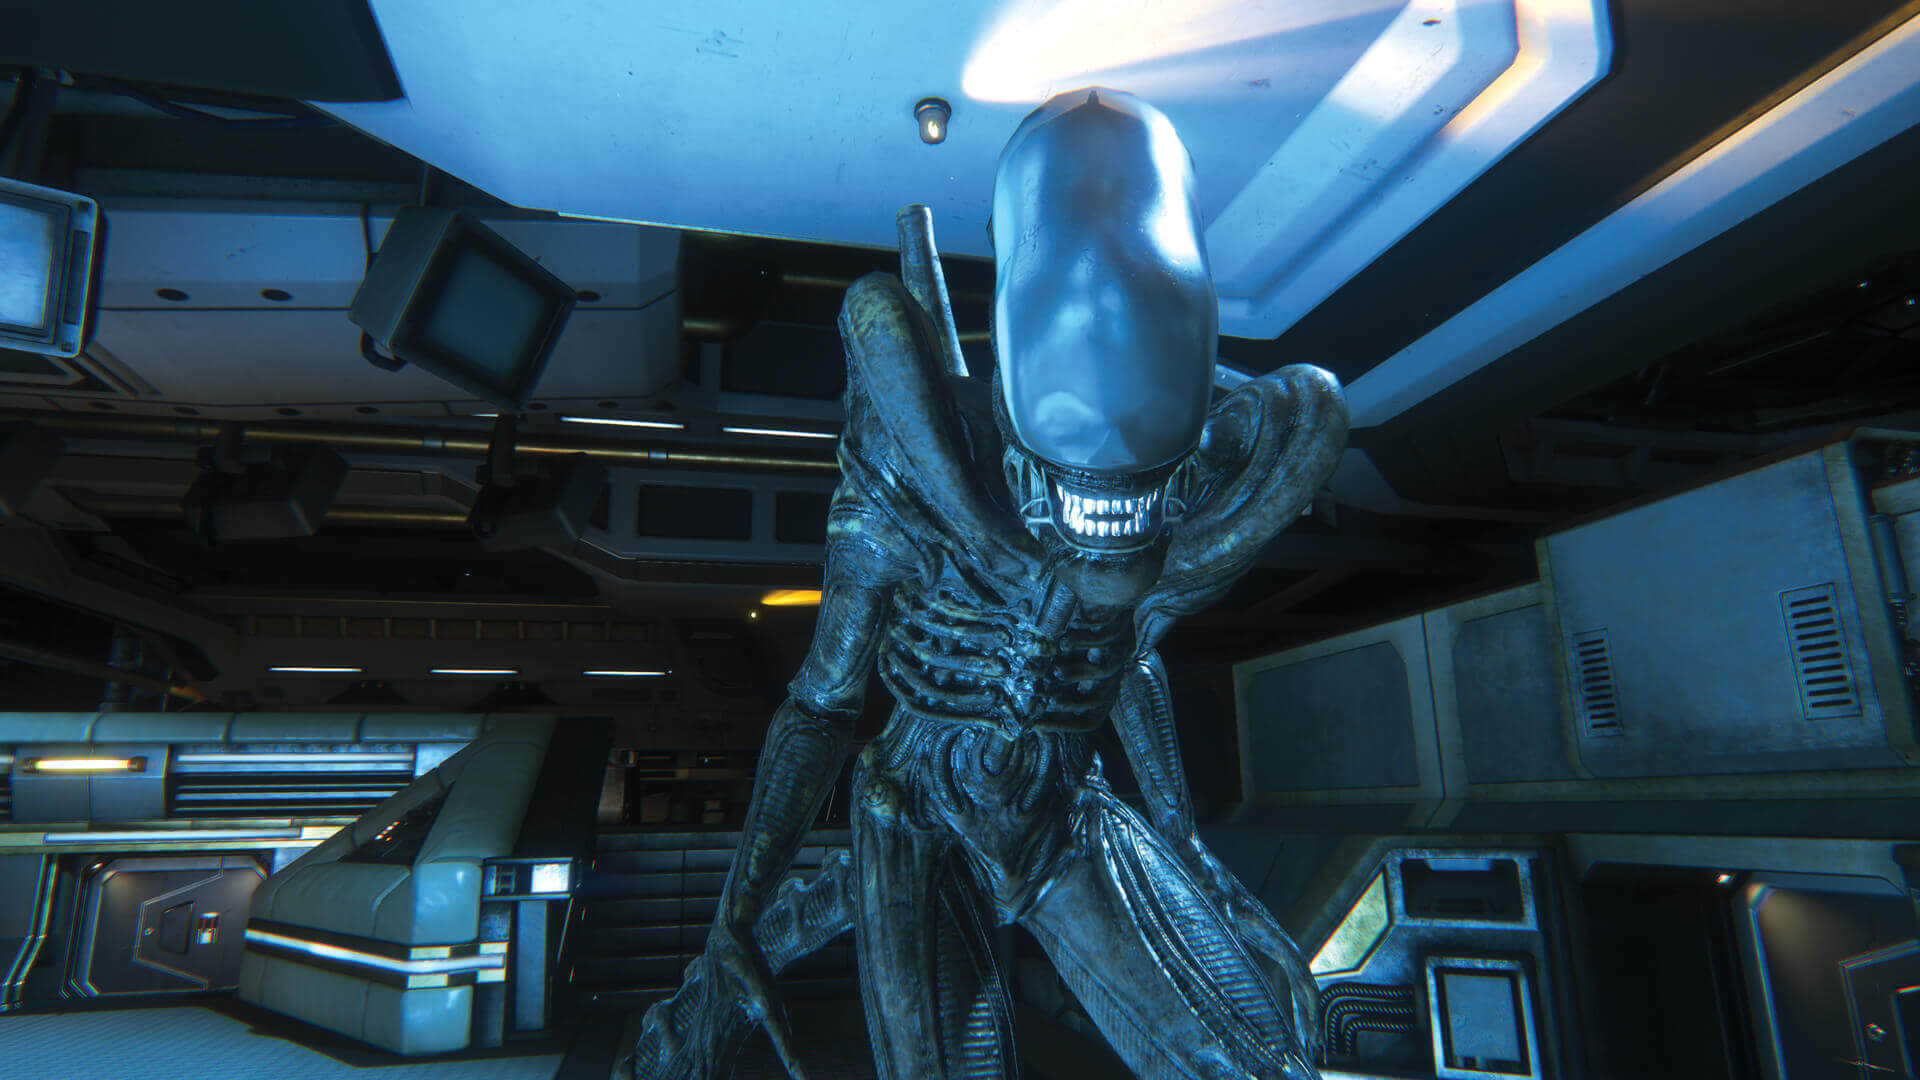 Sega's Alien games are on sale for a limited time on Steam